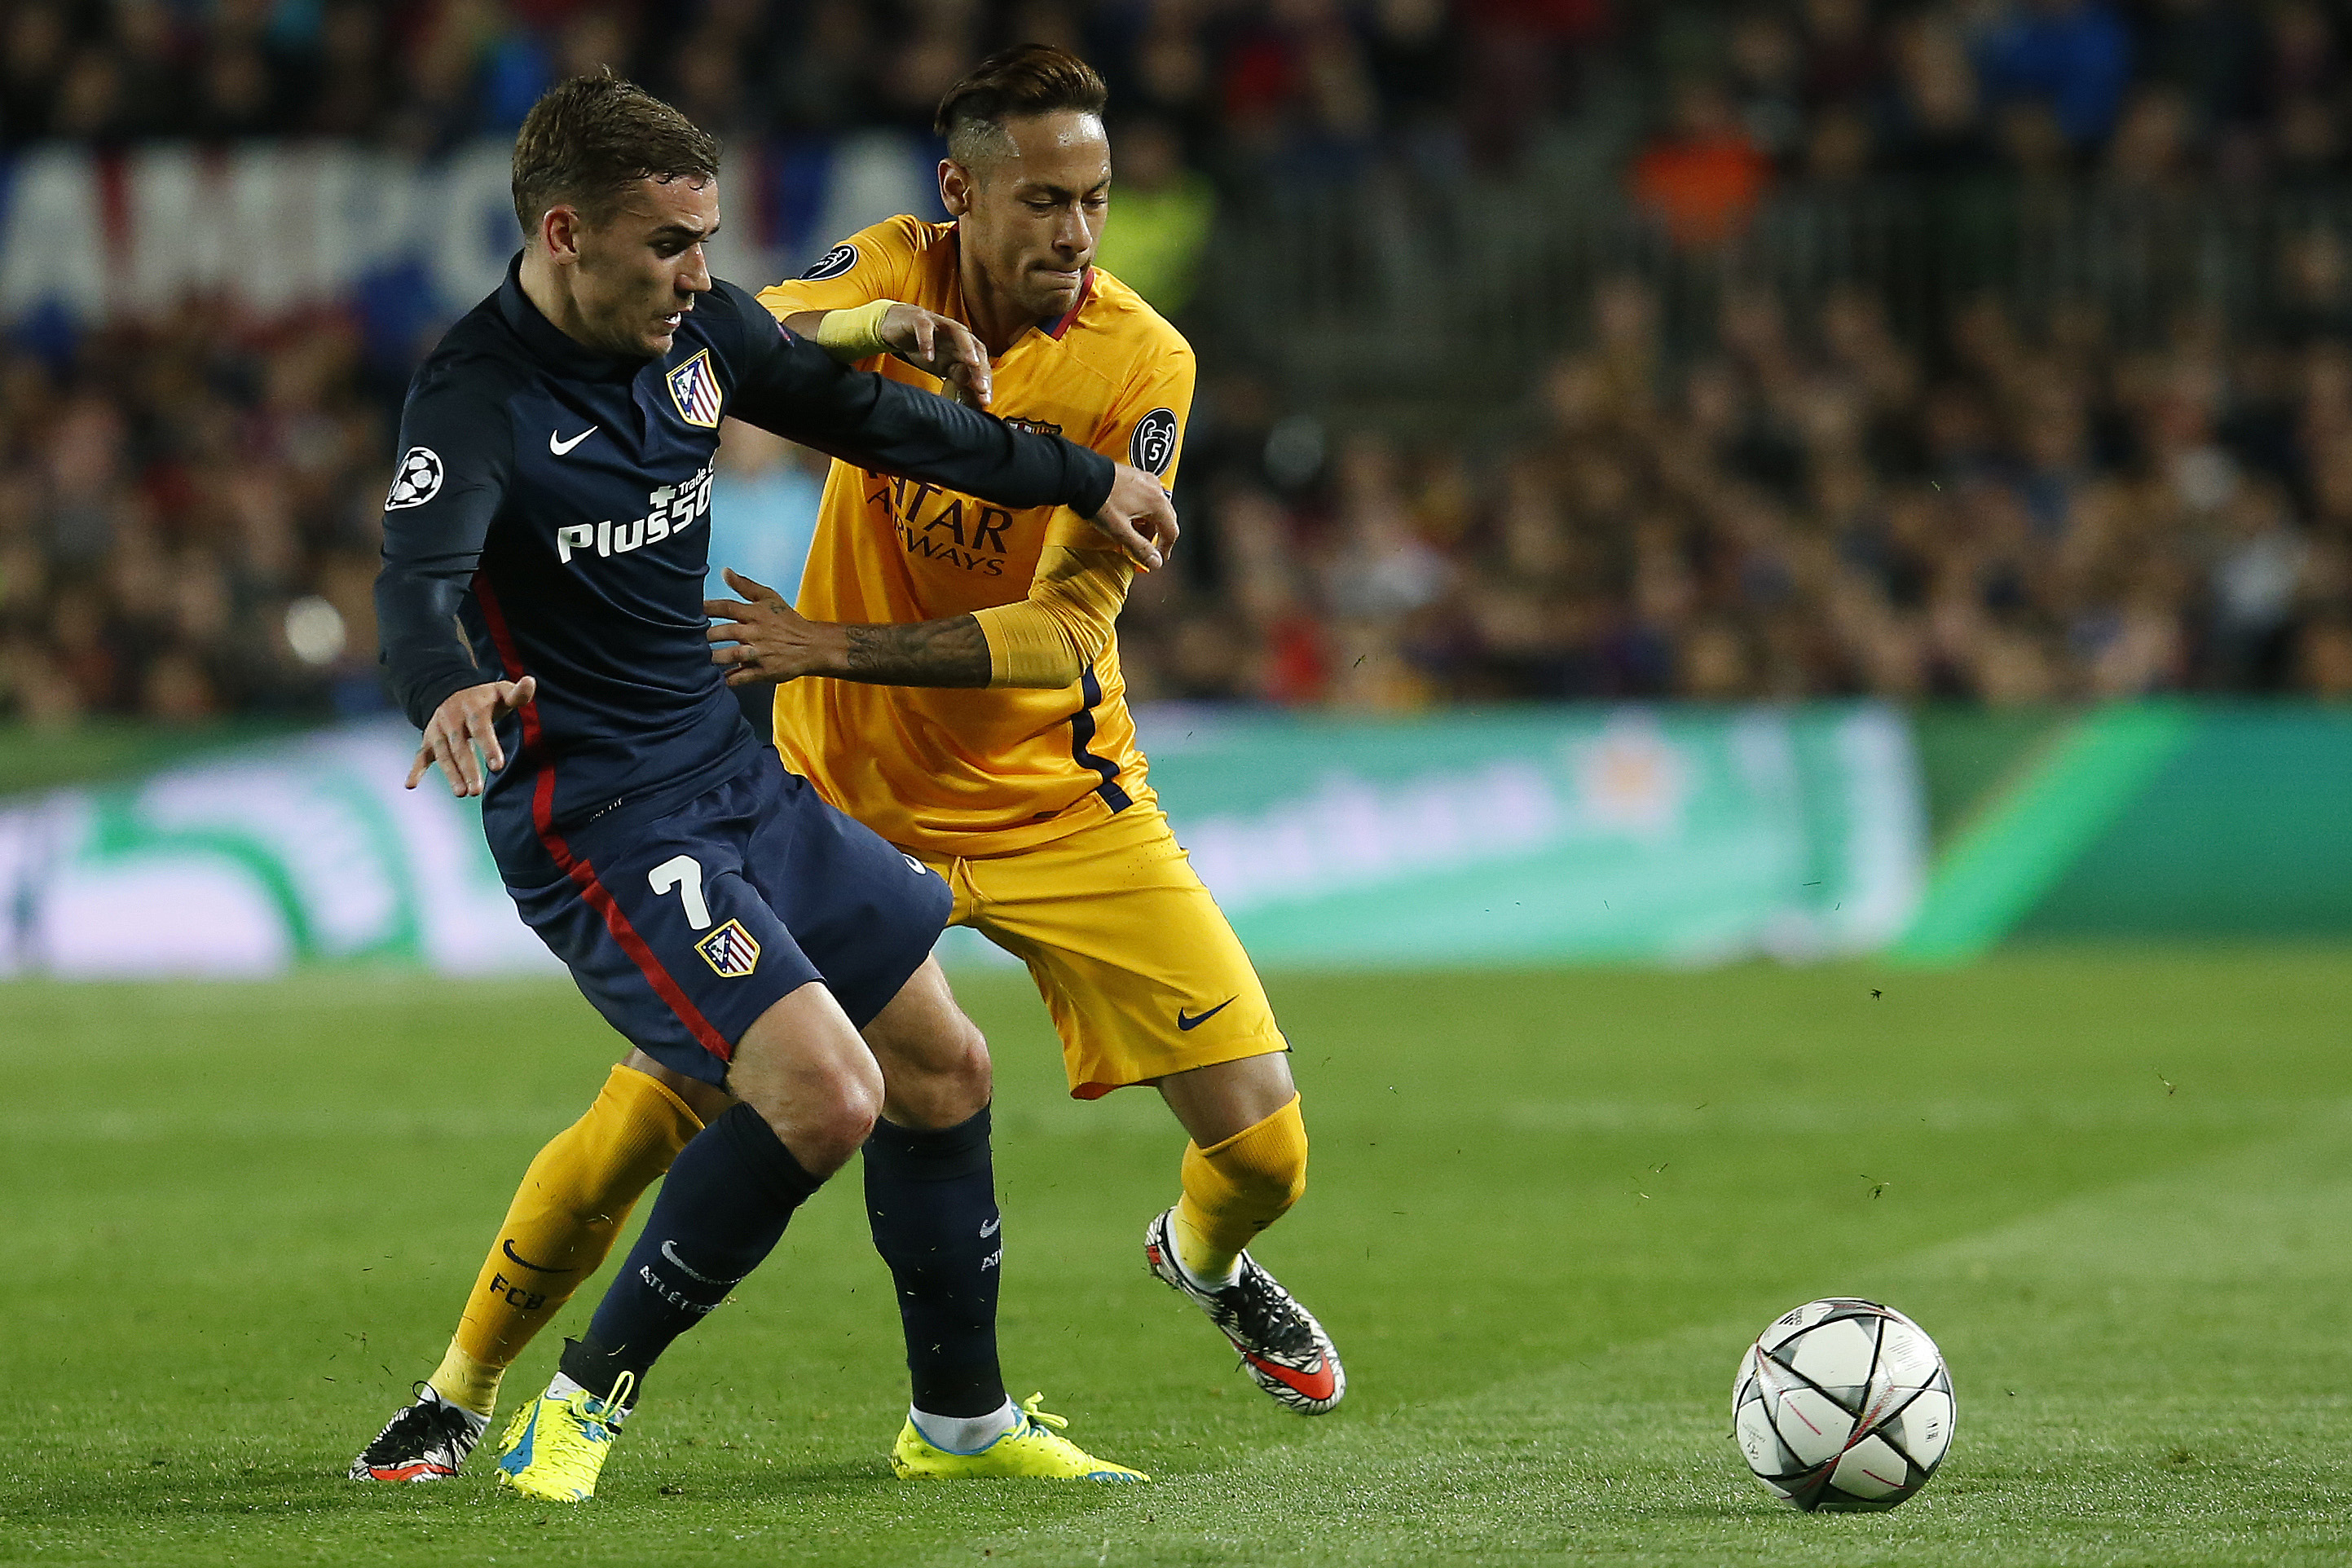 Atletico Madrid's French forward Antoine Griezmann (L) vies with Barcelona's Brazilian forward Neymar during the UEFA Champions League quarter finals first leg football match FC Barcelona vs Atletico de Madrid at the Camp Nou stadium in Barcelona on April 5, 2016. / AFP / PAU BARRENA        (Photo credit should read PAU BARRENA/AFP/Getty Images)